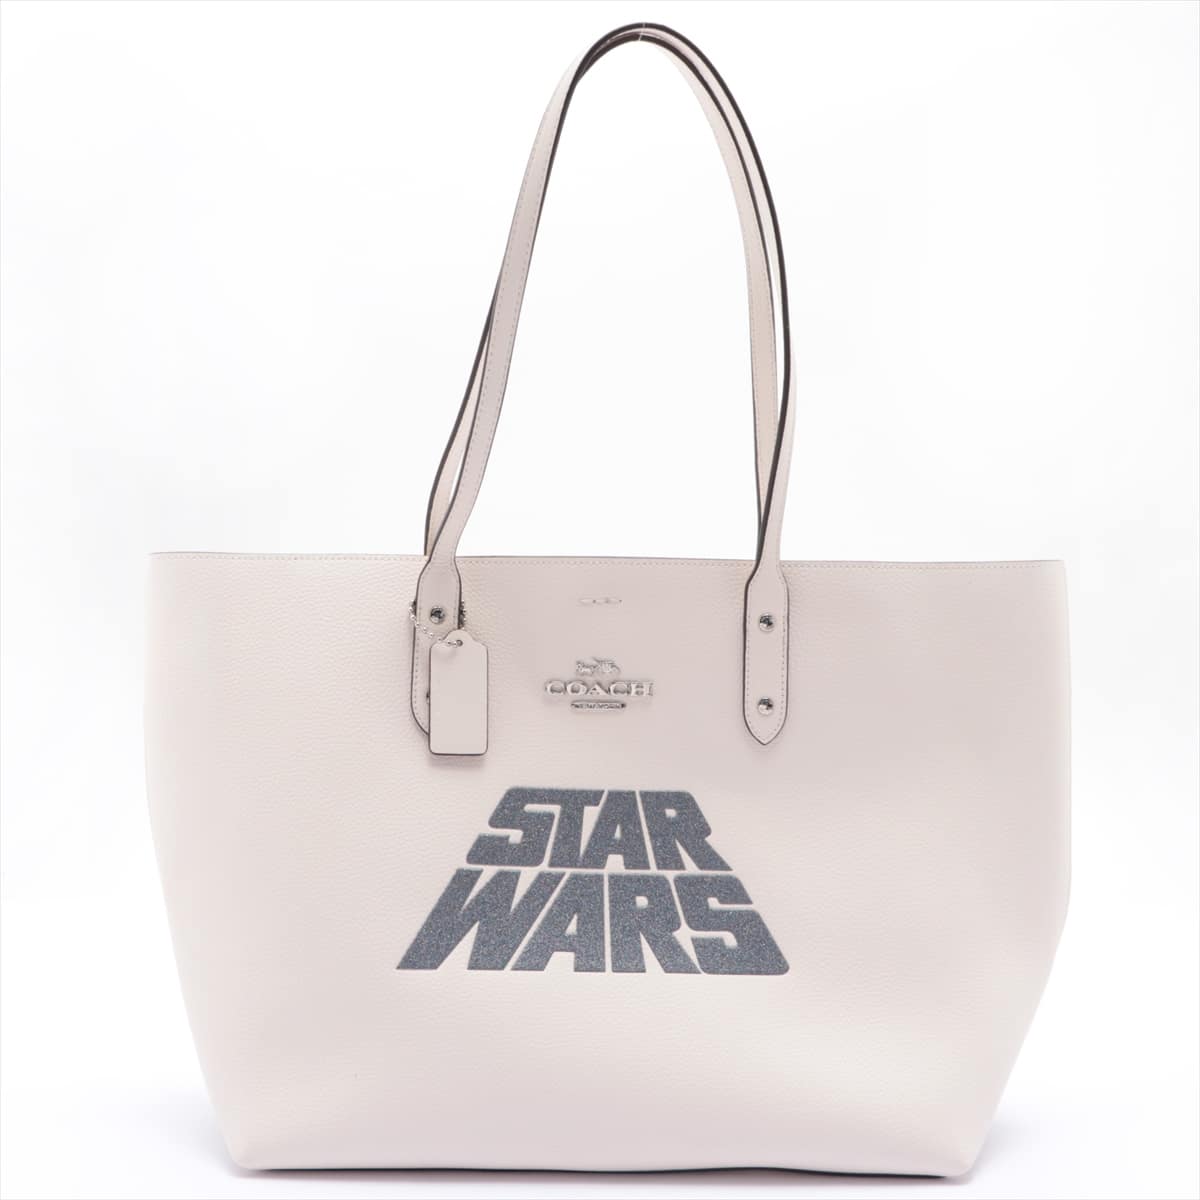 COACH Leather Tote bag White Star wars